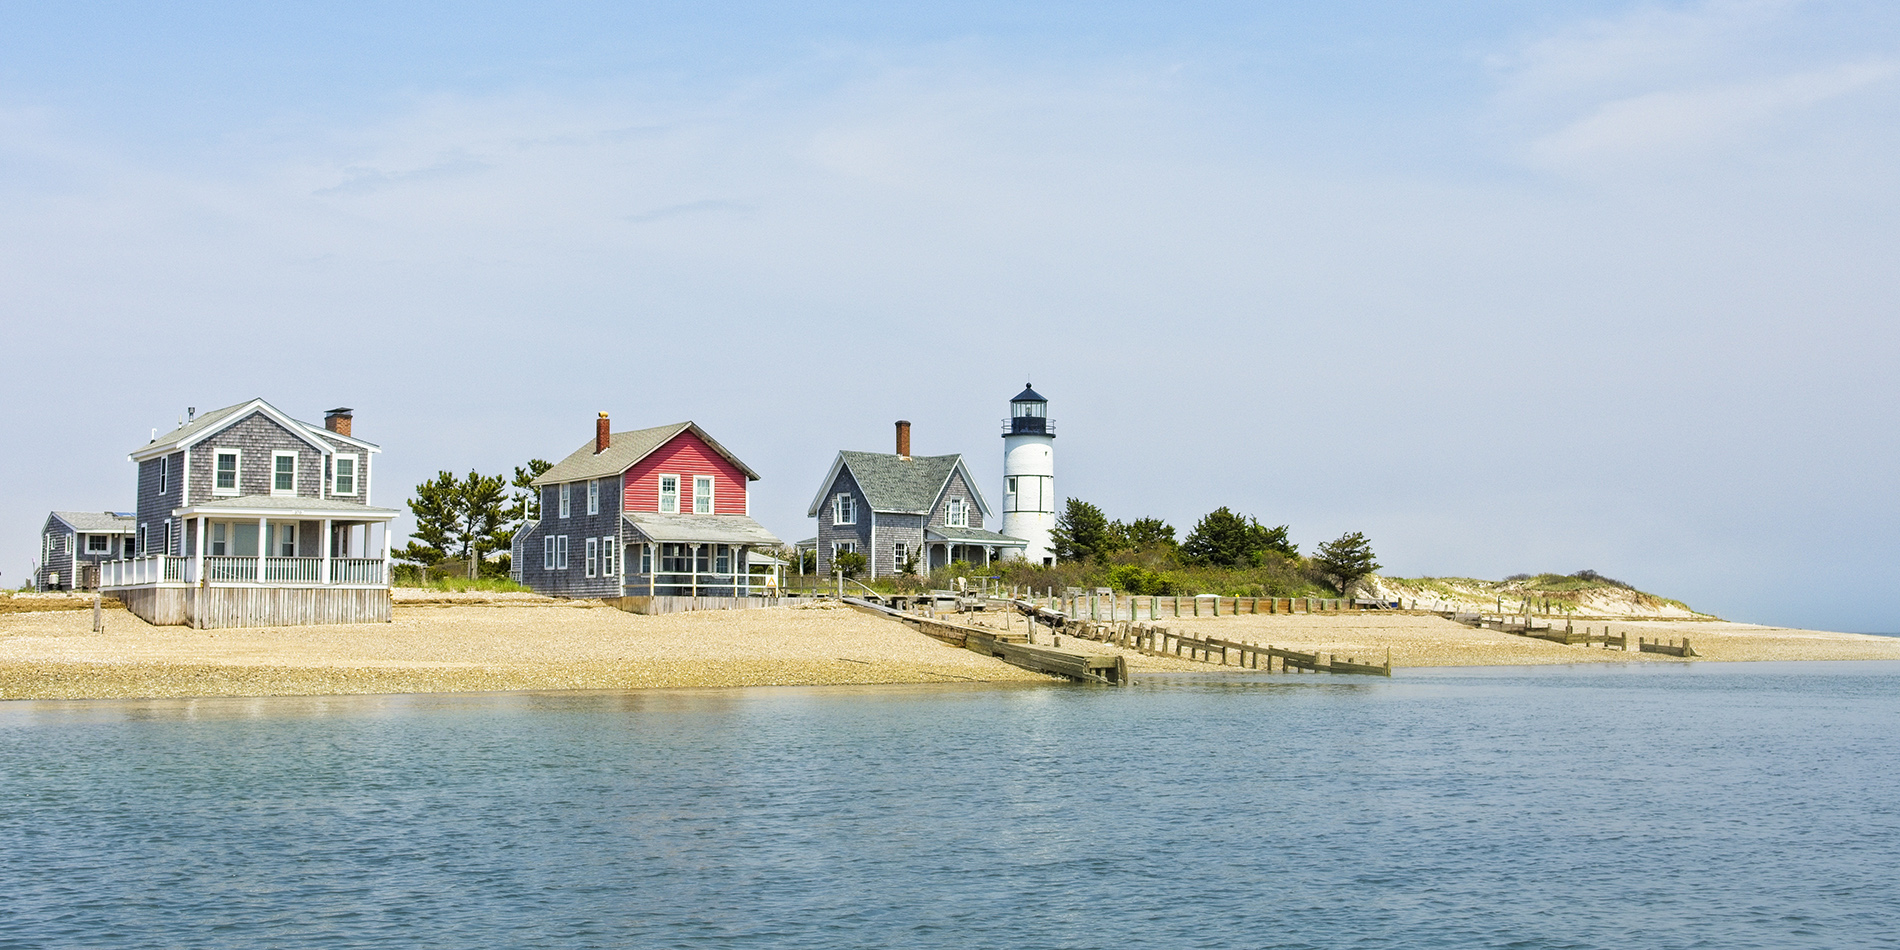 View of Sandy Neck Lighthouse from the harbor in Barnstable